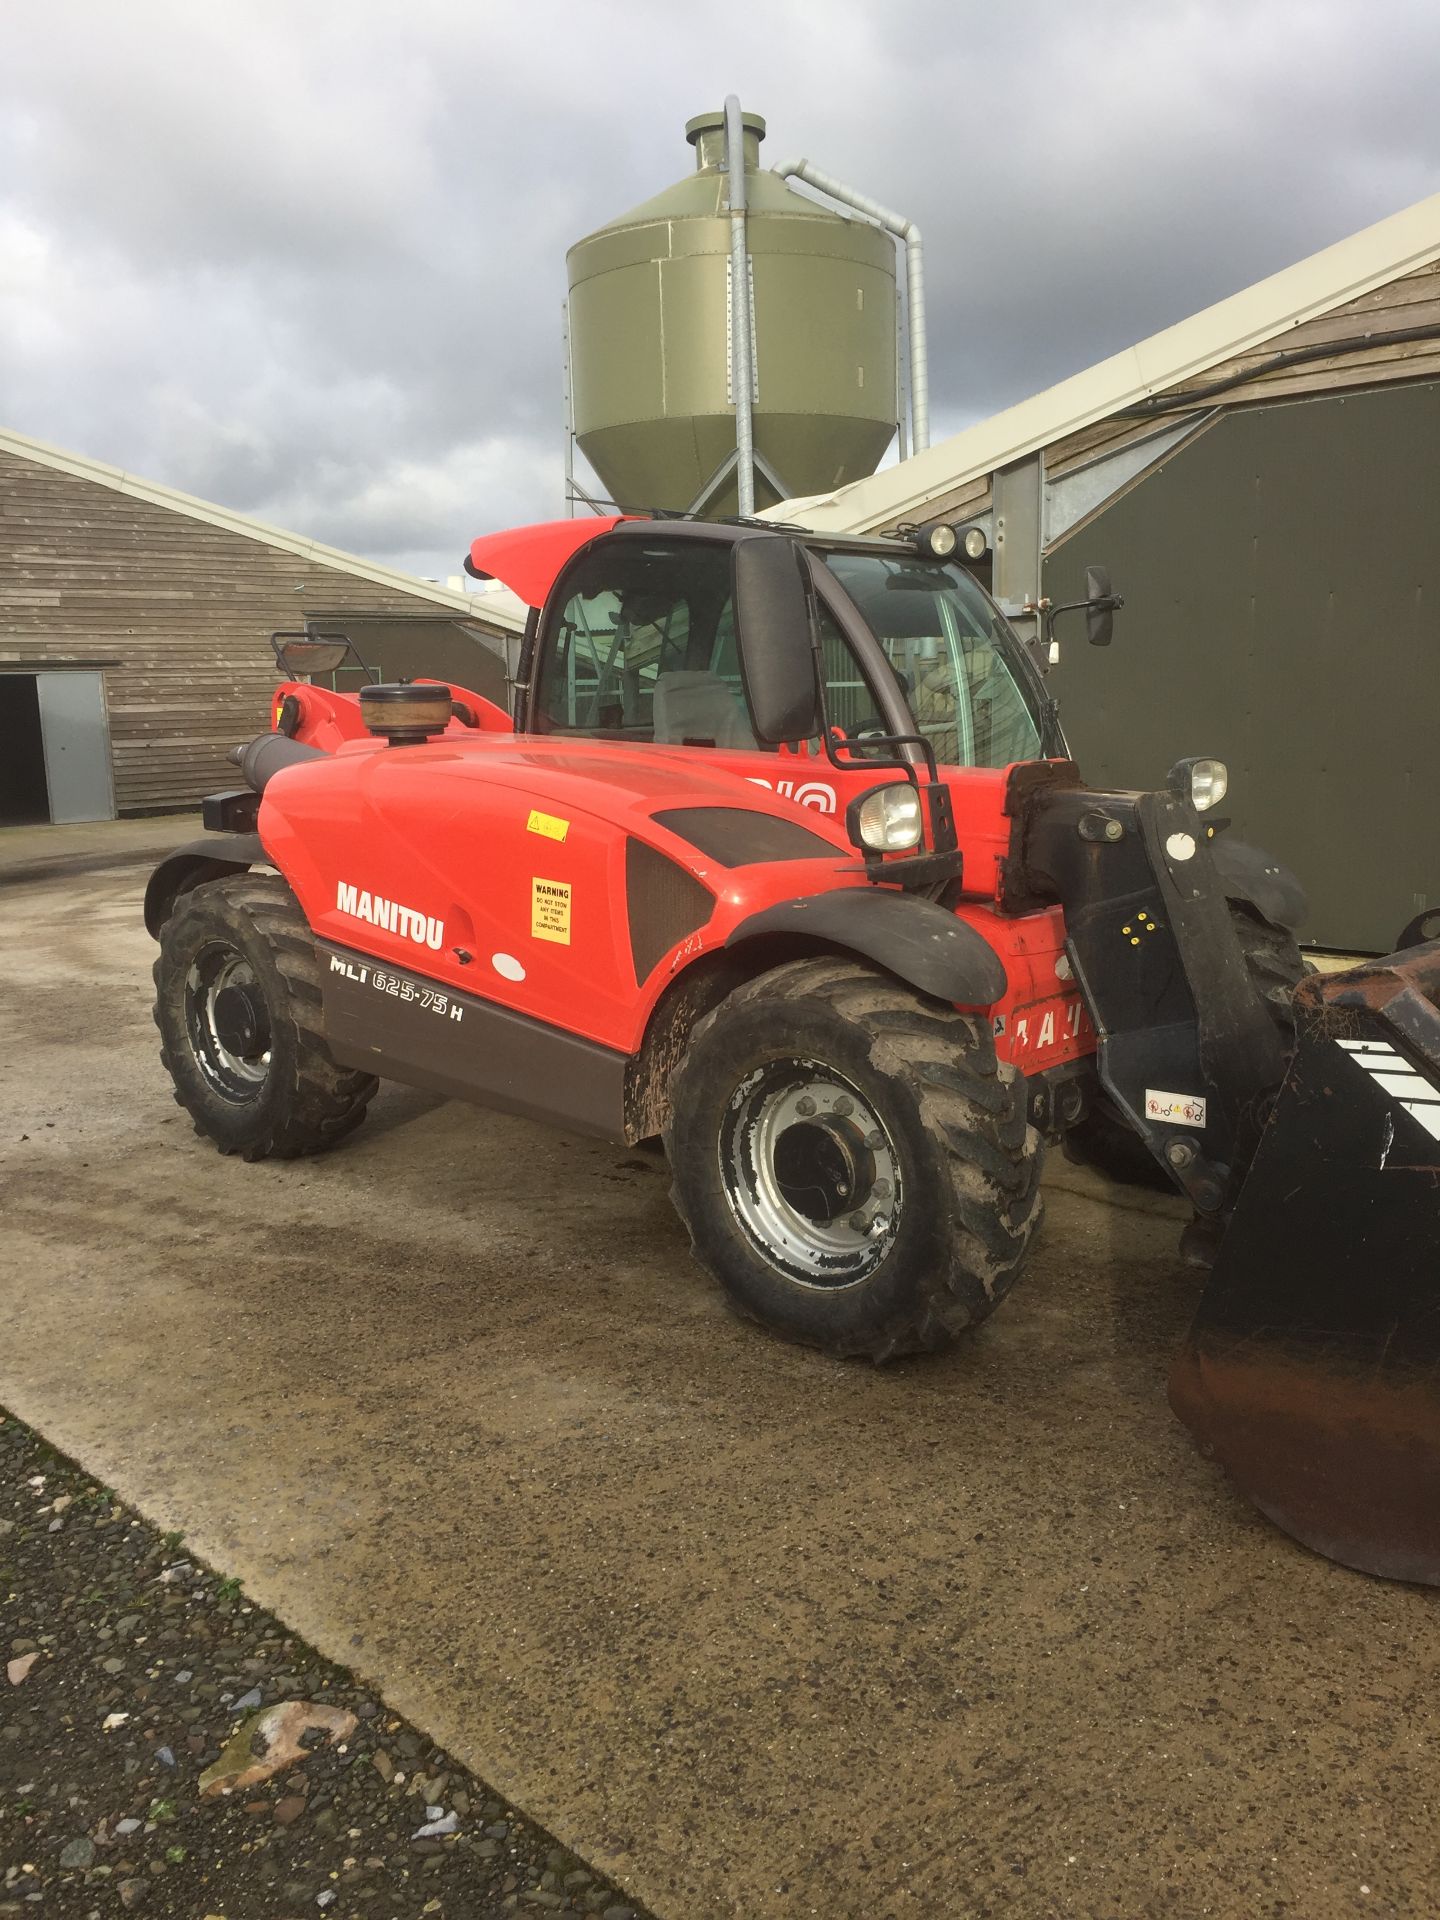 Manitou MLT 625-75H telehandler, Registration No. HF13 FHX (2013), capacity 2500kg x 6m, with